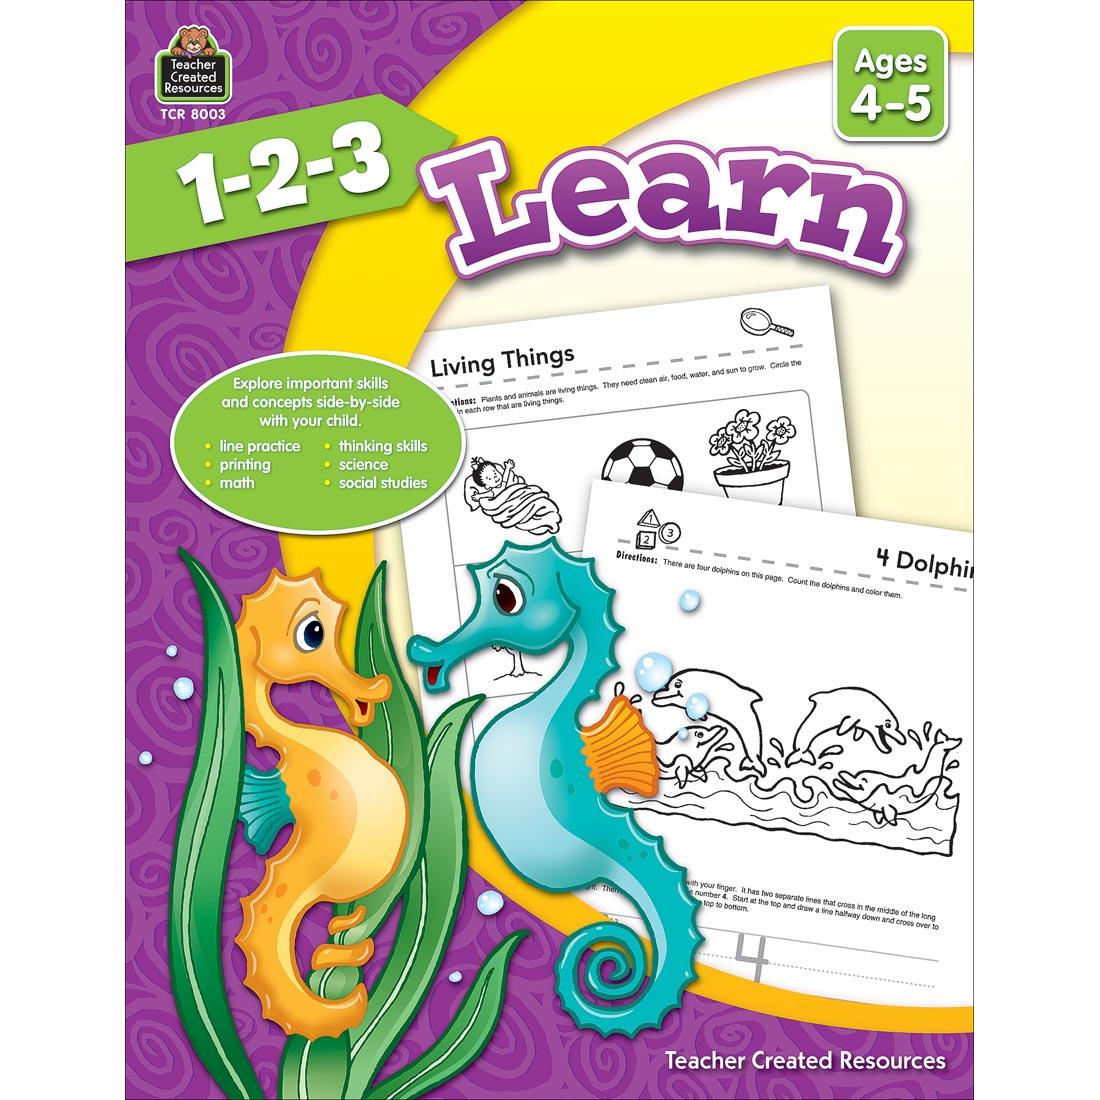 1-2-3 Learn Book by Teacher Created Resources Ages 4-5